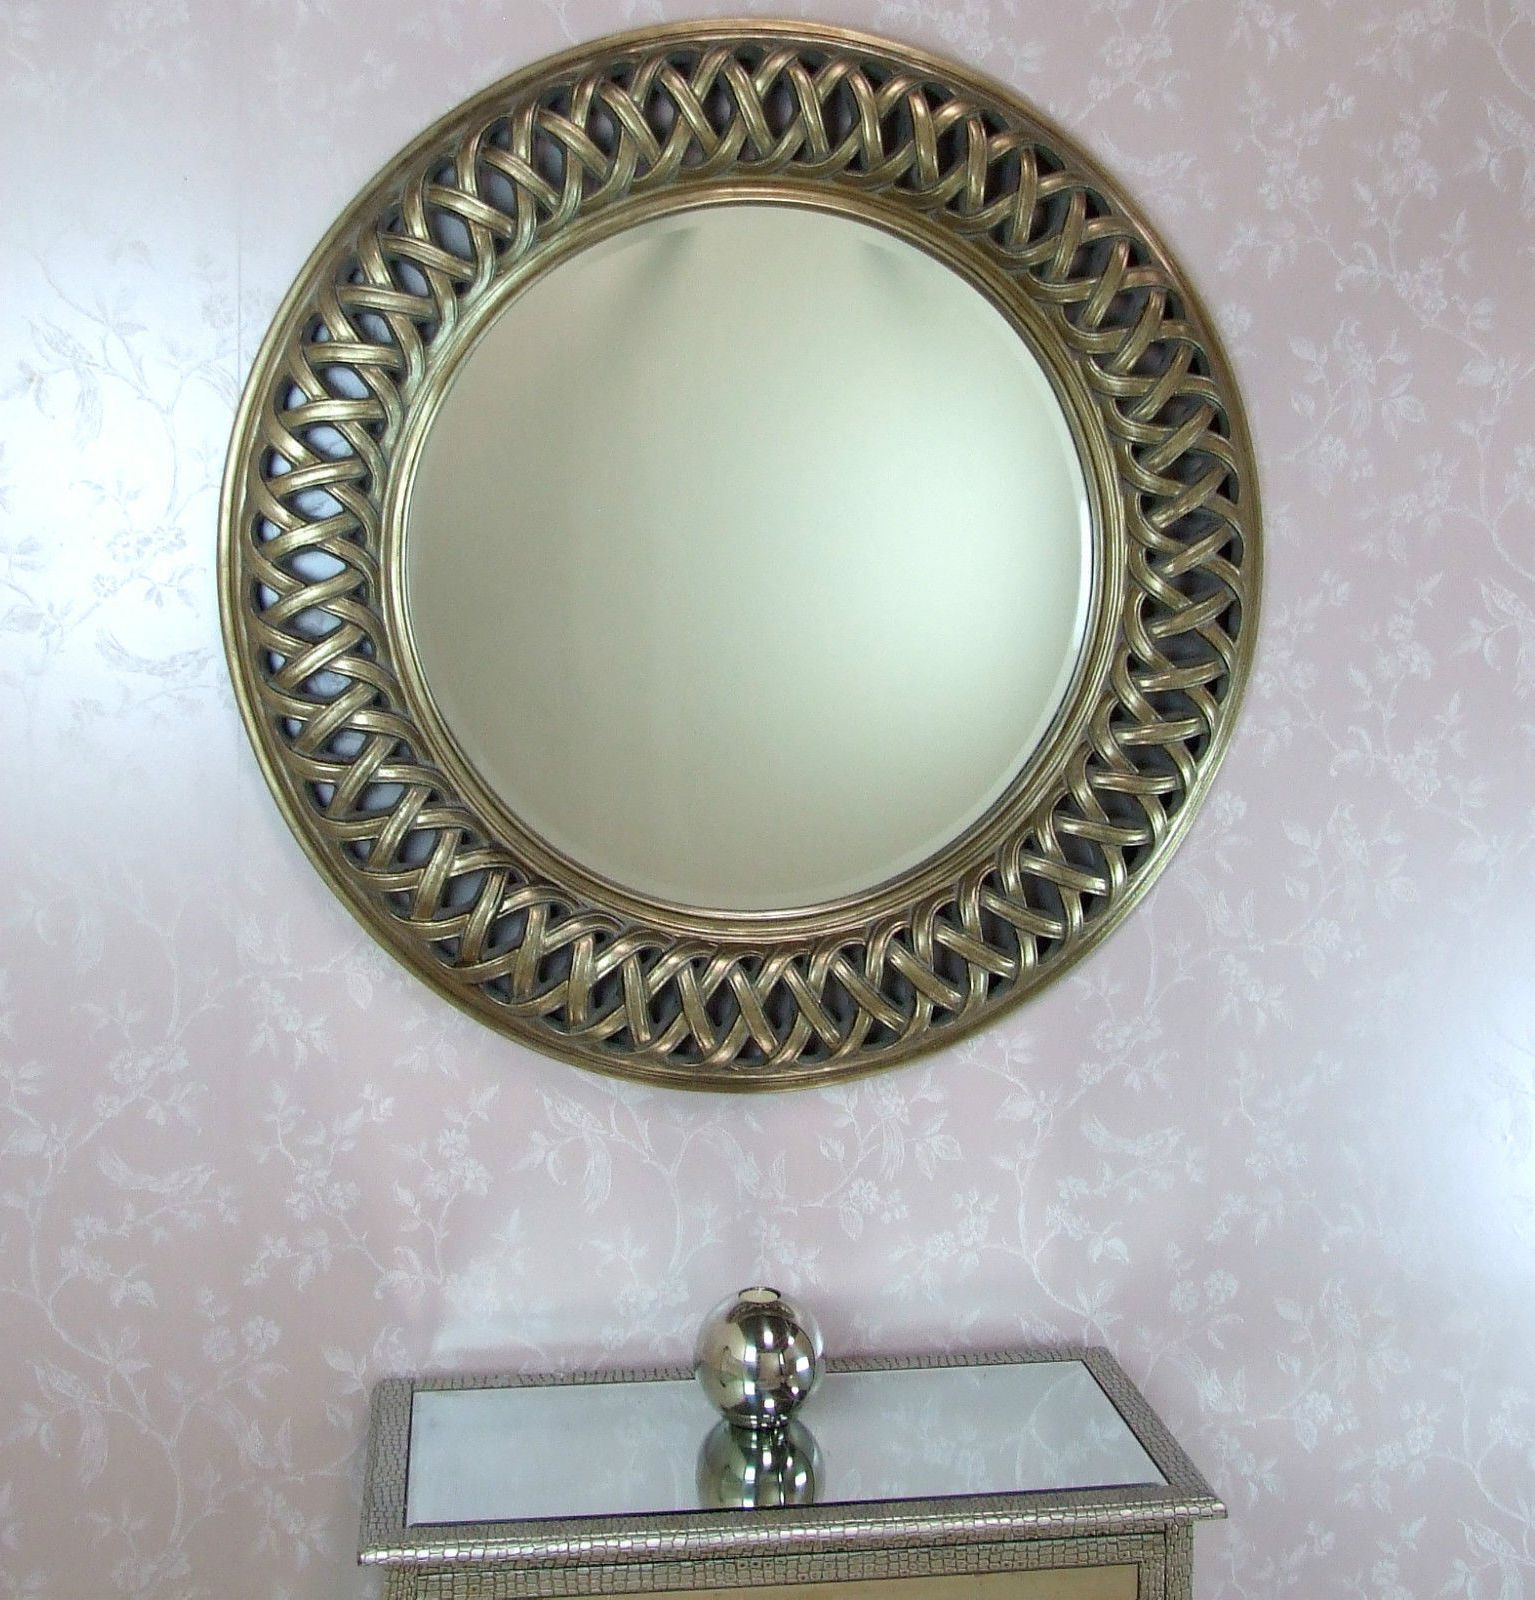 Antique Silver Round Wall Mirrors Regarding Most Recent Venice Very Large Round Wall Mirror Champagne Silver Frame Art Deco (View 14 of 15)